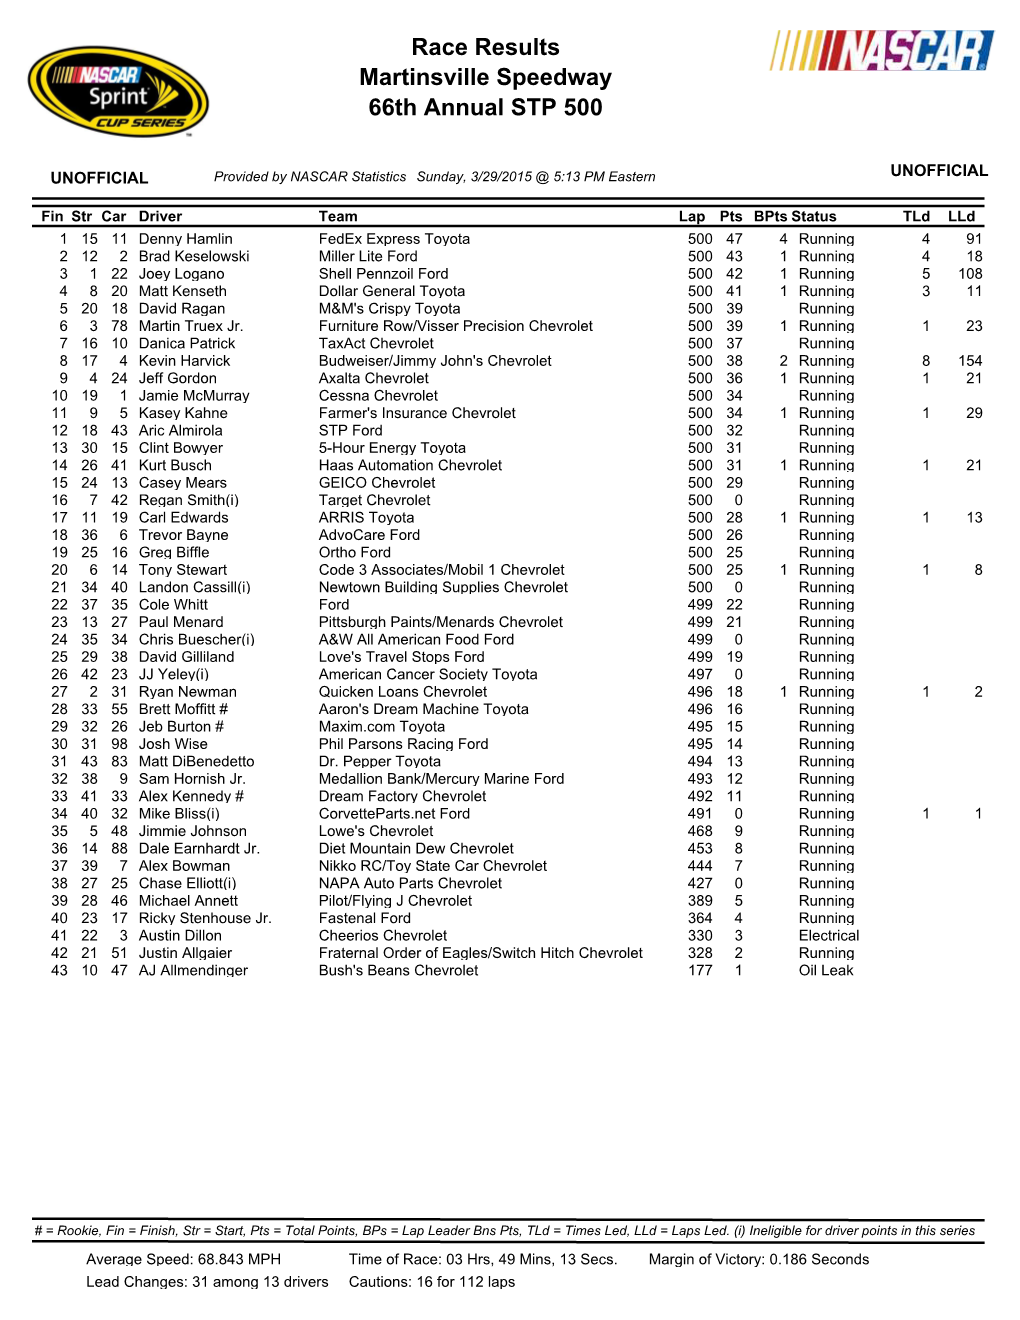 Martinsville Speedway 66Th Annual STP 500 Race Results